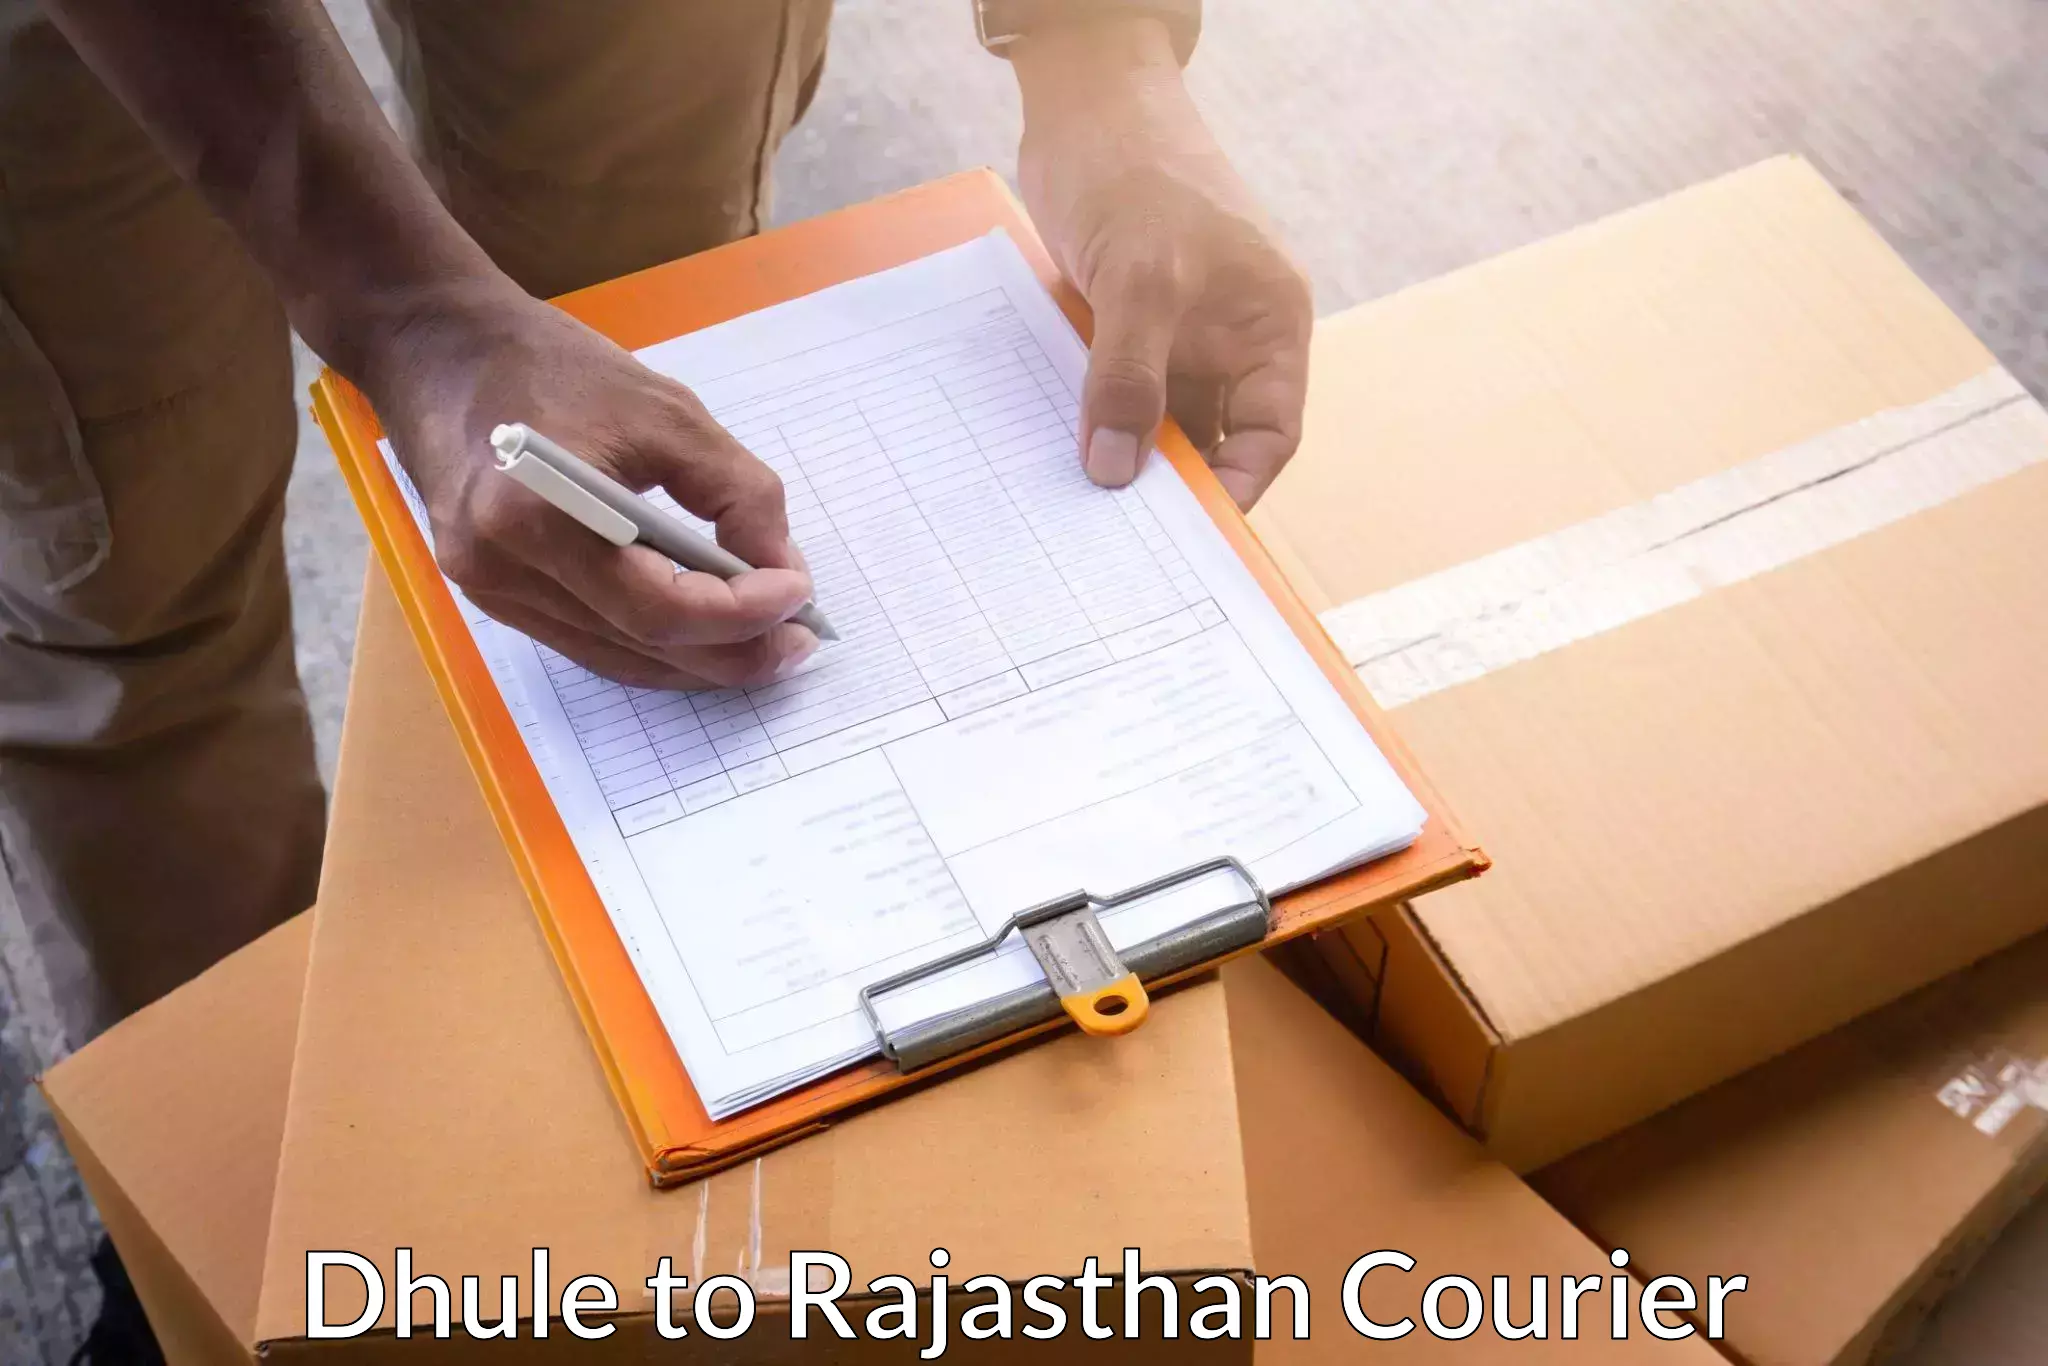 Doorstep delivery service Dhule to Chaumahla